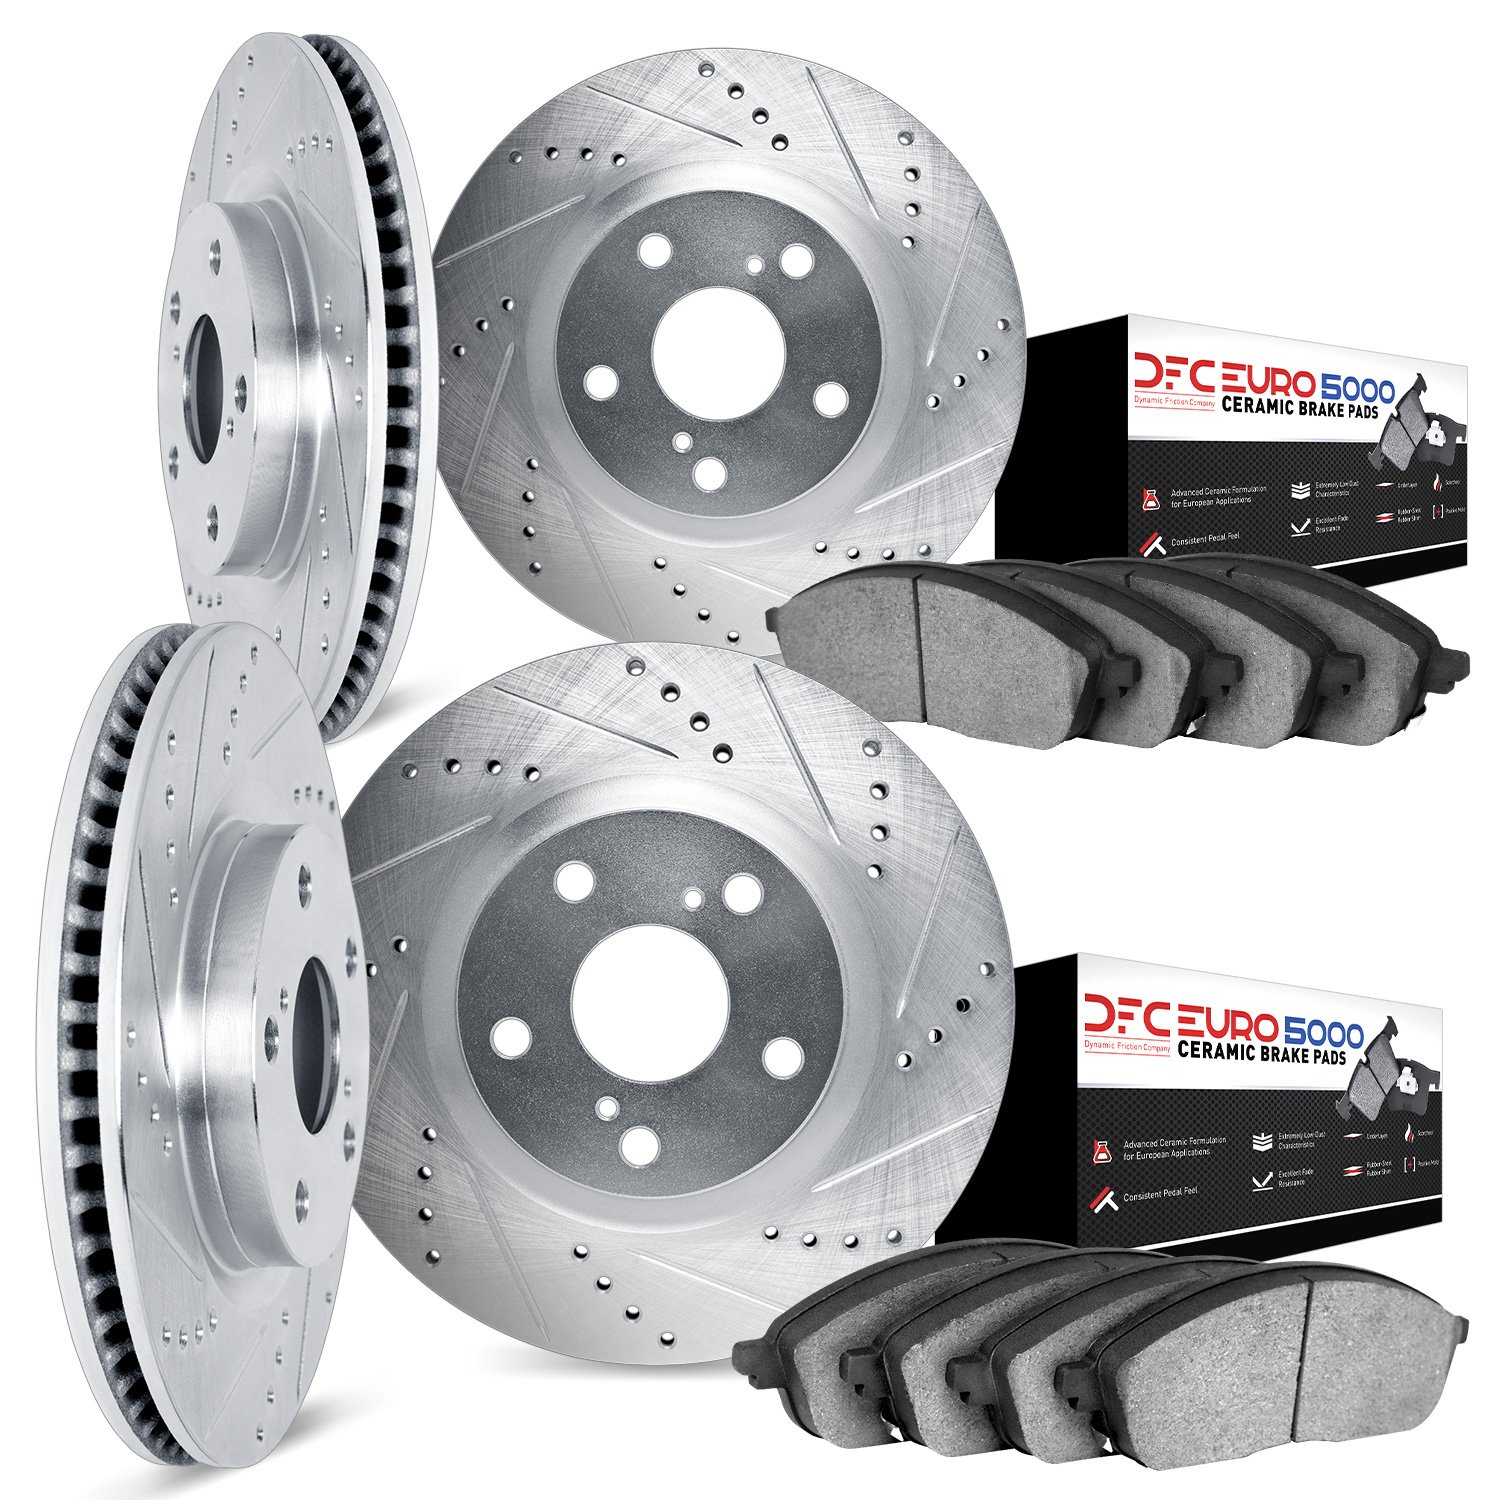 7604-31013 Drilled/Slotted Brake Rotors w/5000 Euro Ceramic Brake Pads Kit [Silver], 1995-2001 BMW, Position: Front and Rear